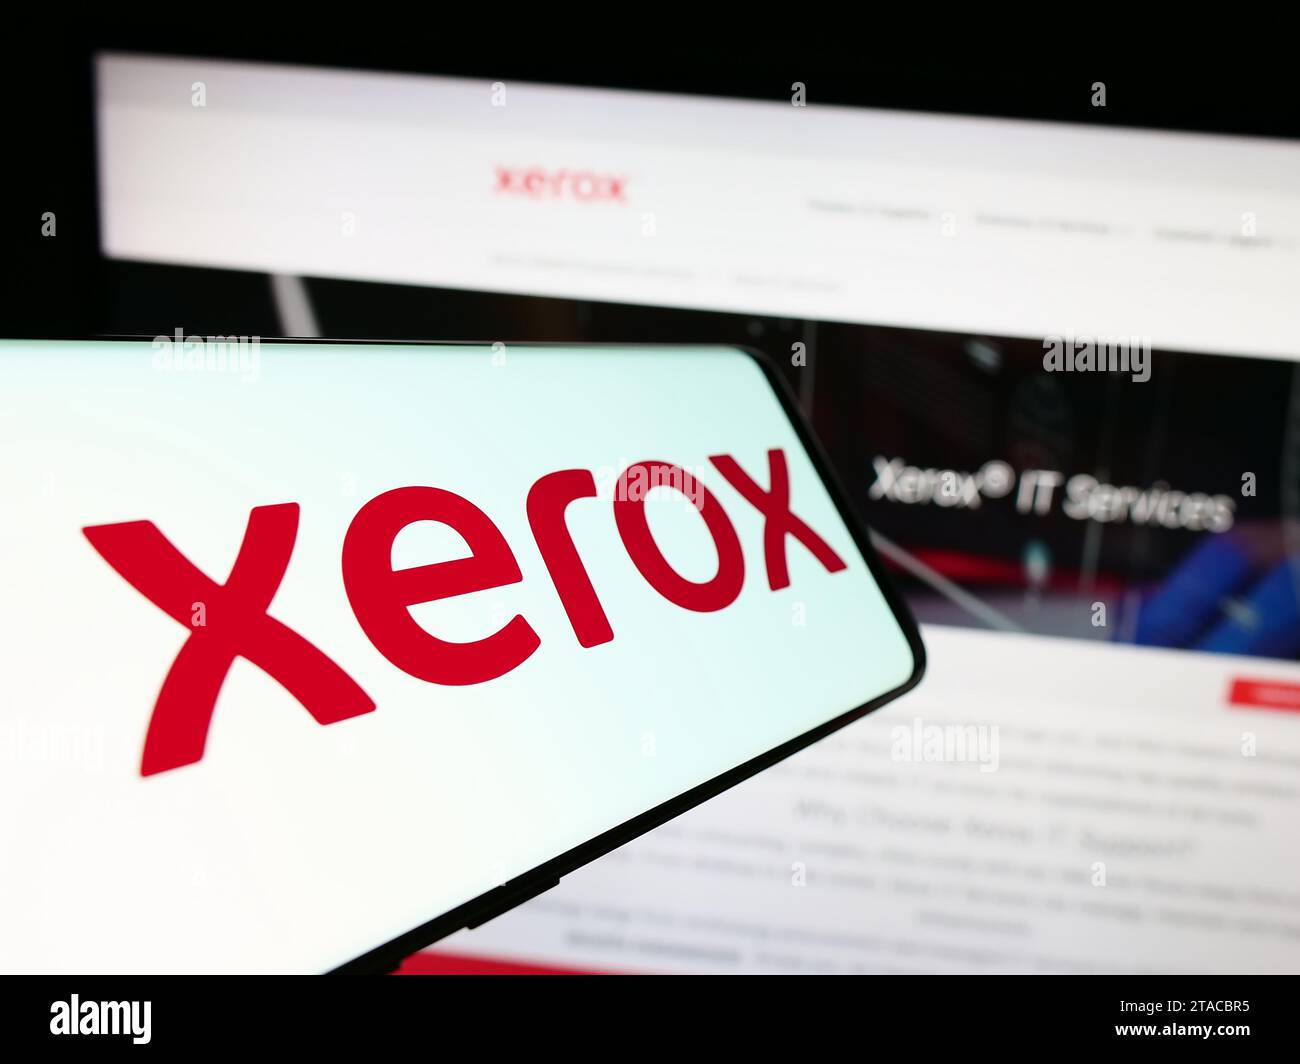 Mobile phone with logo of American printer company Xerox Holdings Corporation in front of business website. Focus on center of phone display. Stock Photo